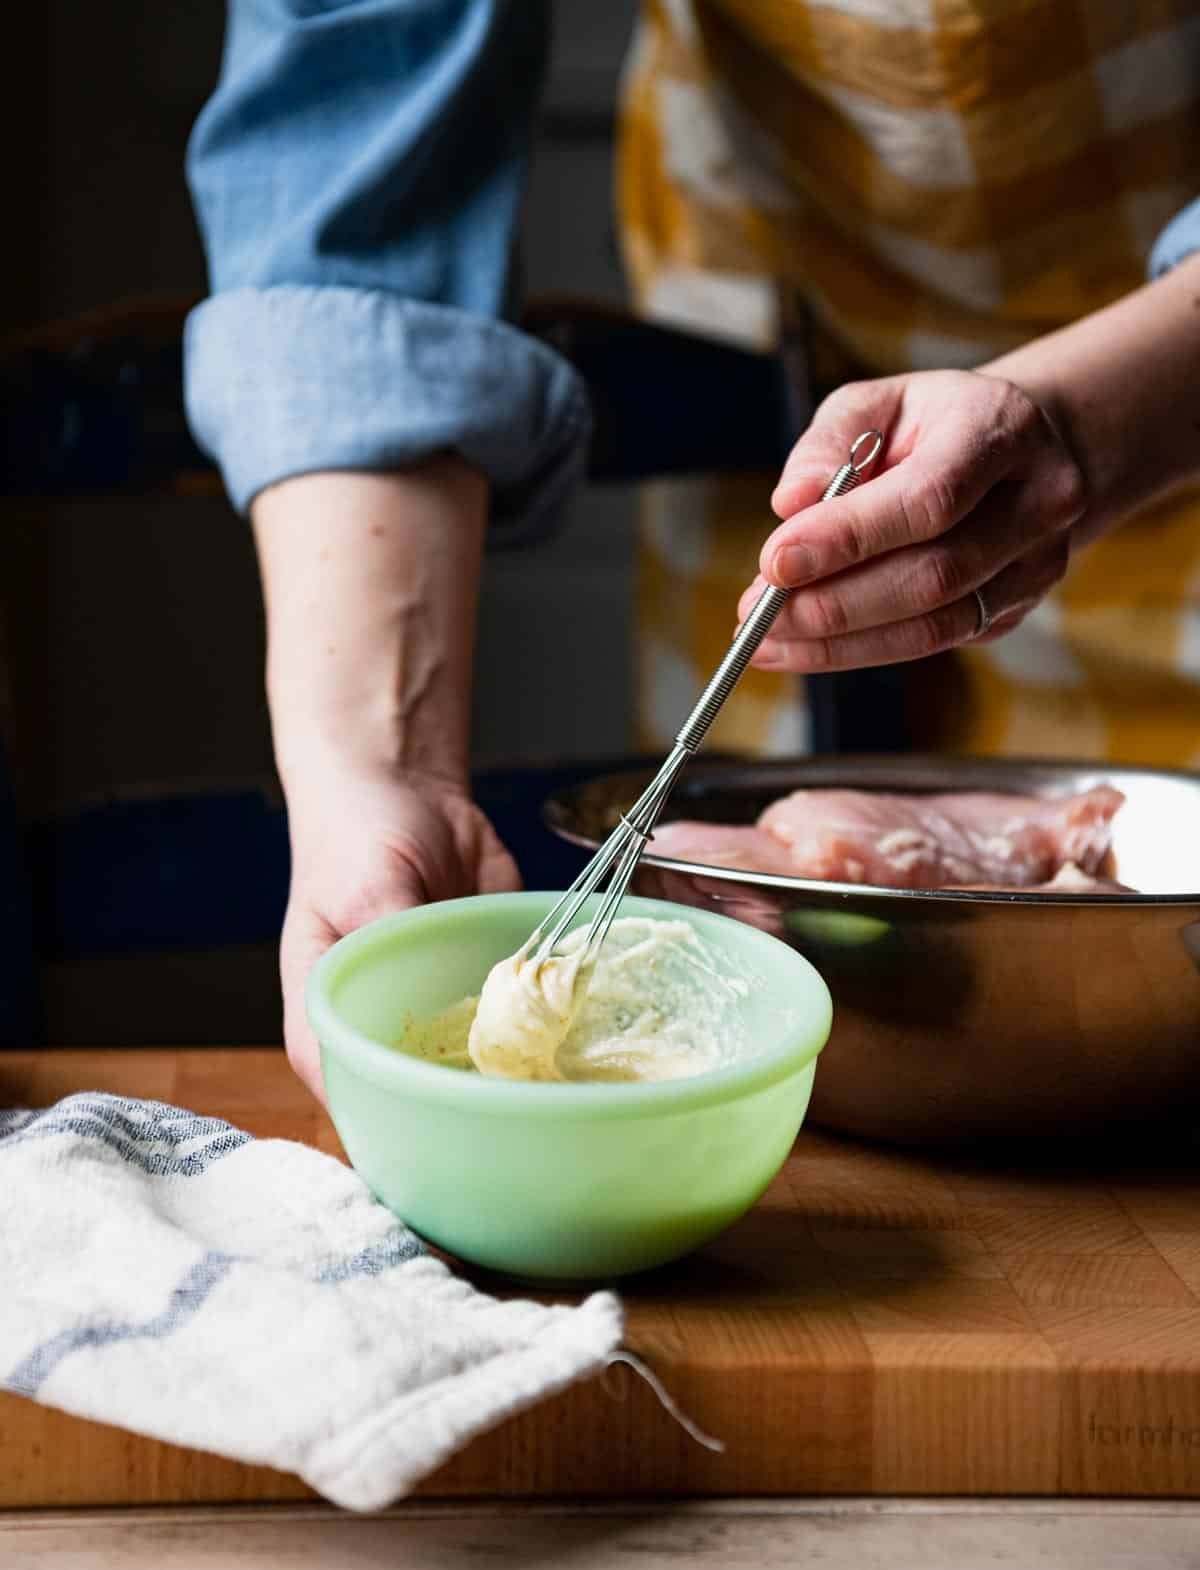 Whisking together mayo mixture in a small green bowl.